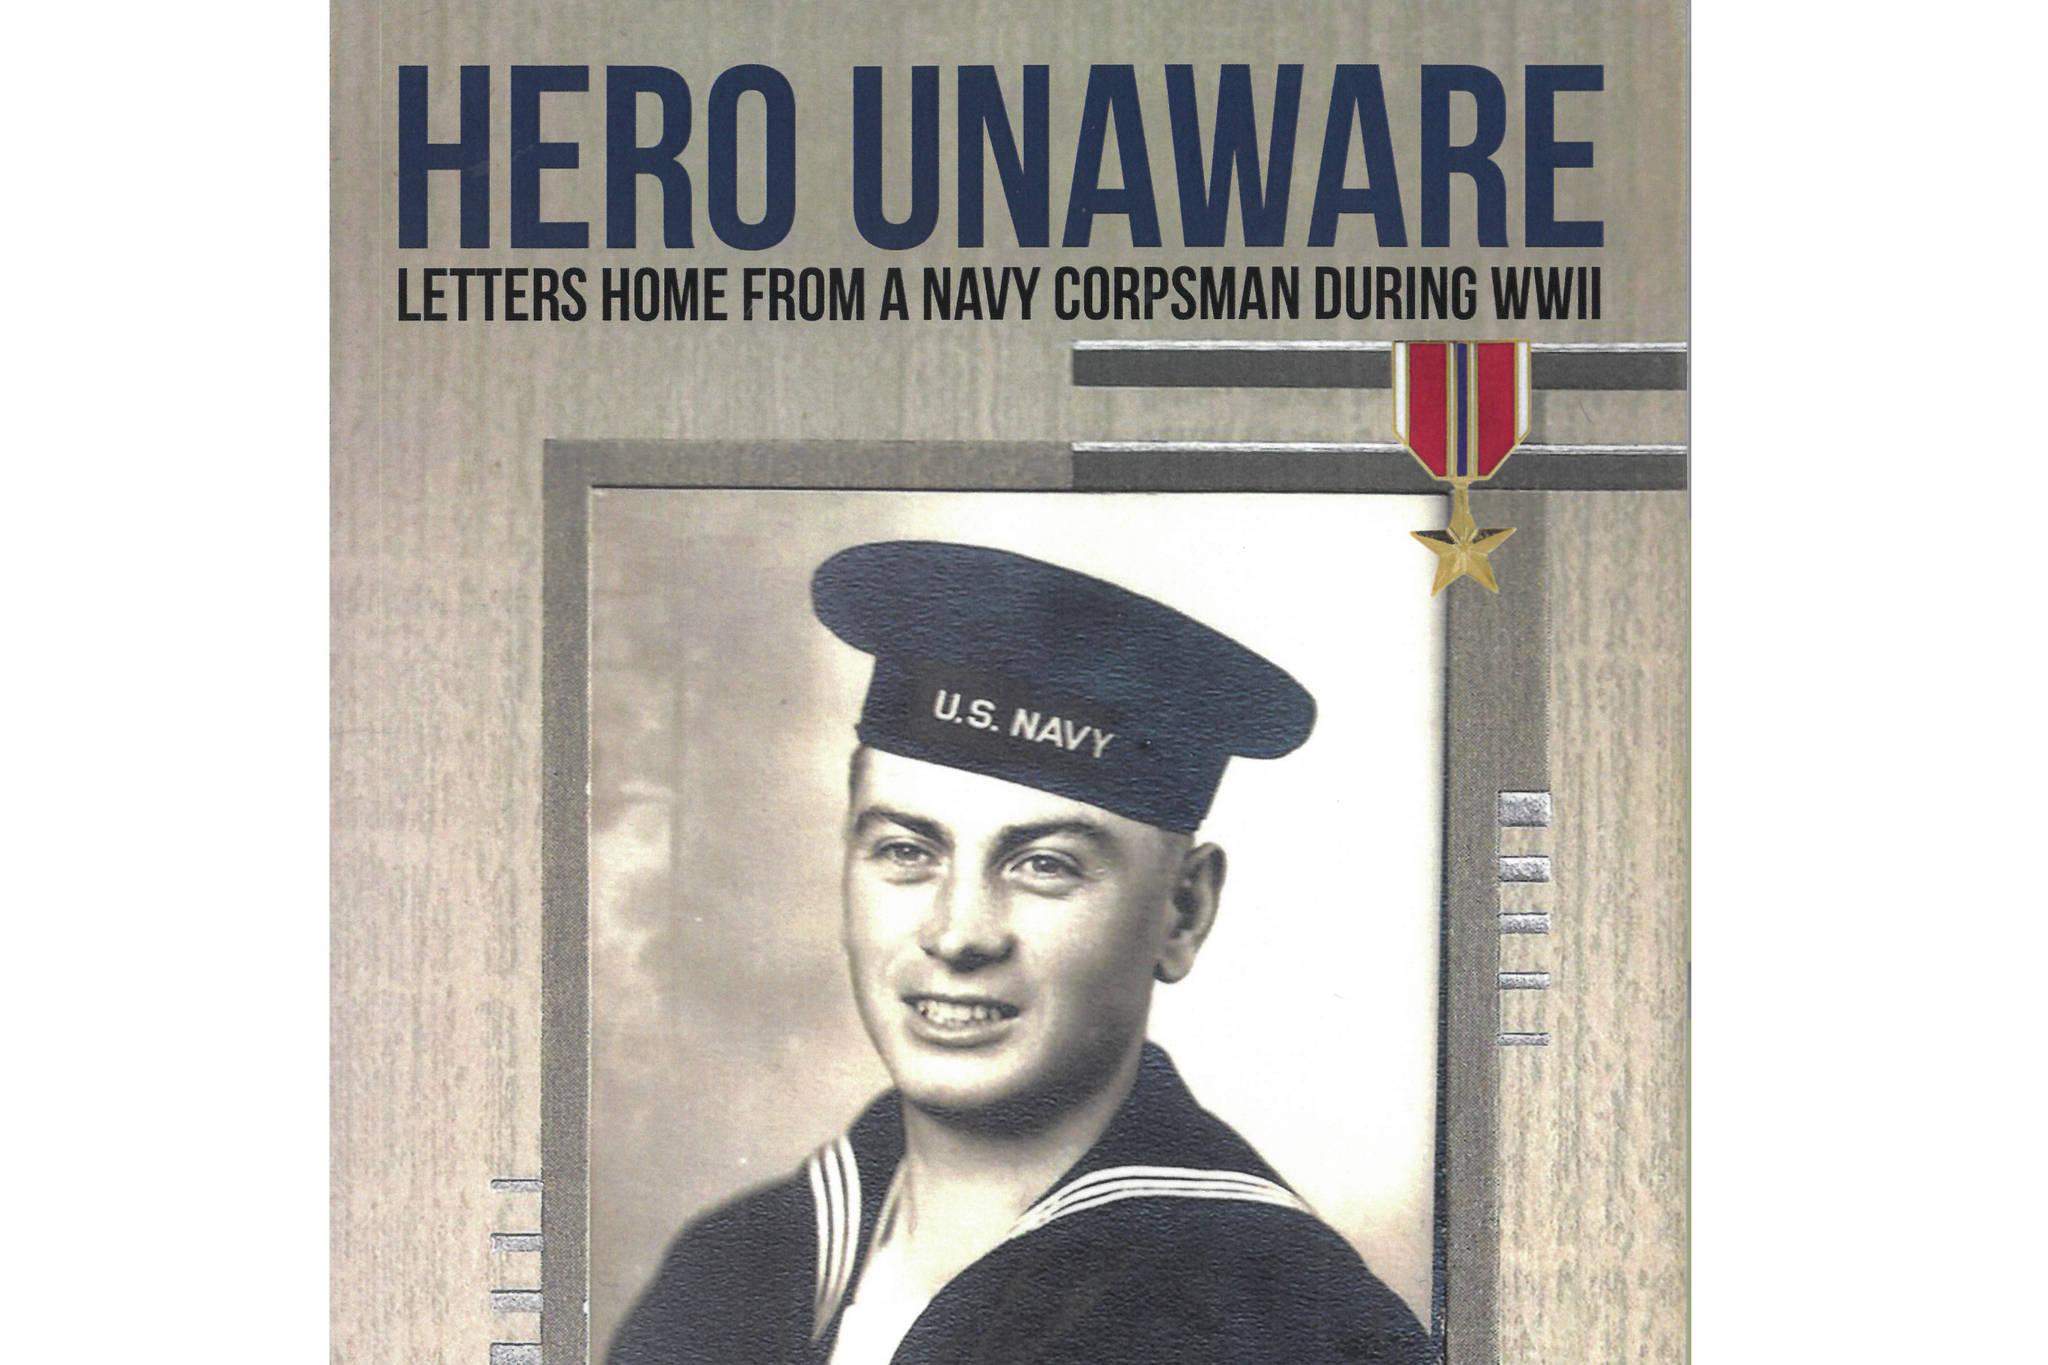 The cover of Doug Dodd's "Hero Unaware" features a photo of Walter Dodd in his U.S. Navy uniform at the start of World War II.